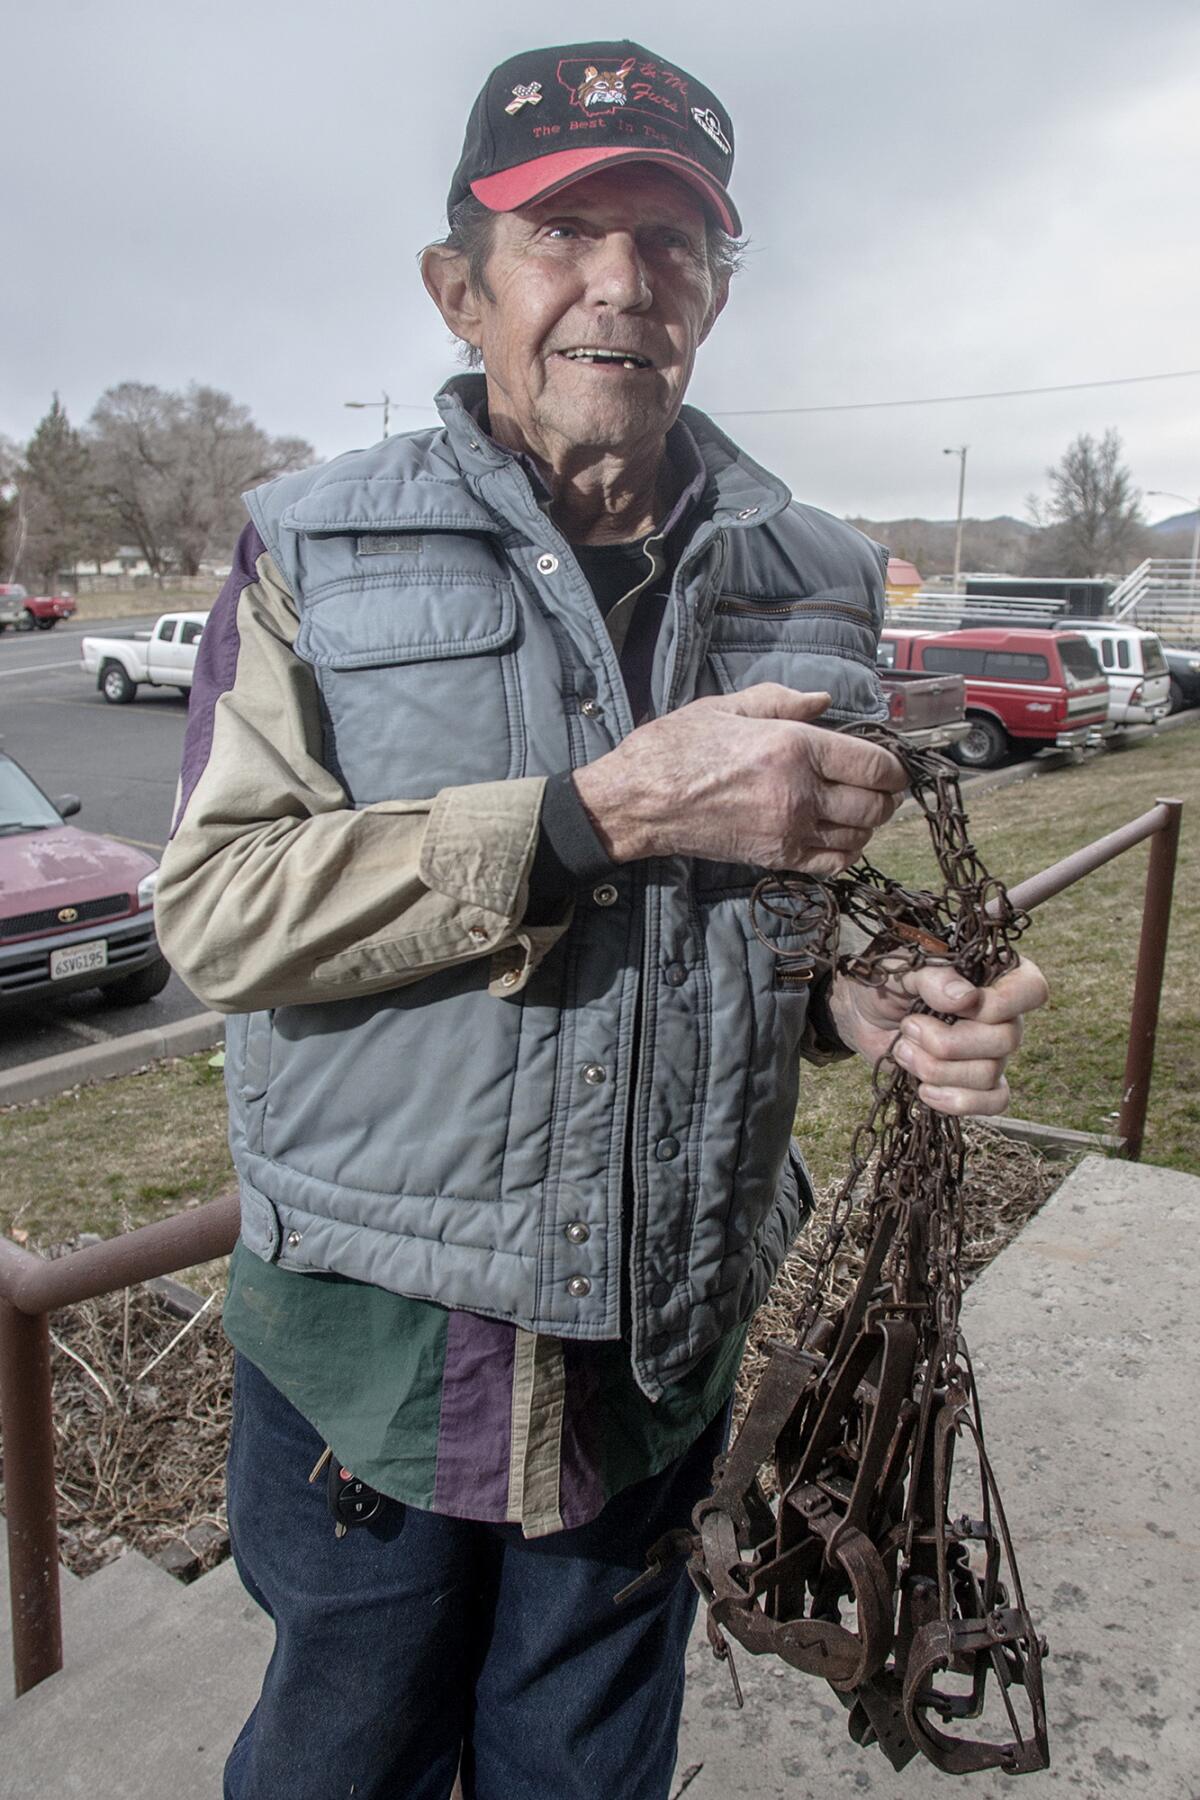 California fur trapper Tim Wion has a handful of old traps that he hopes to sell to out-of-state trappers at a fur sale in Klamath Falls, Ore.